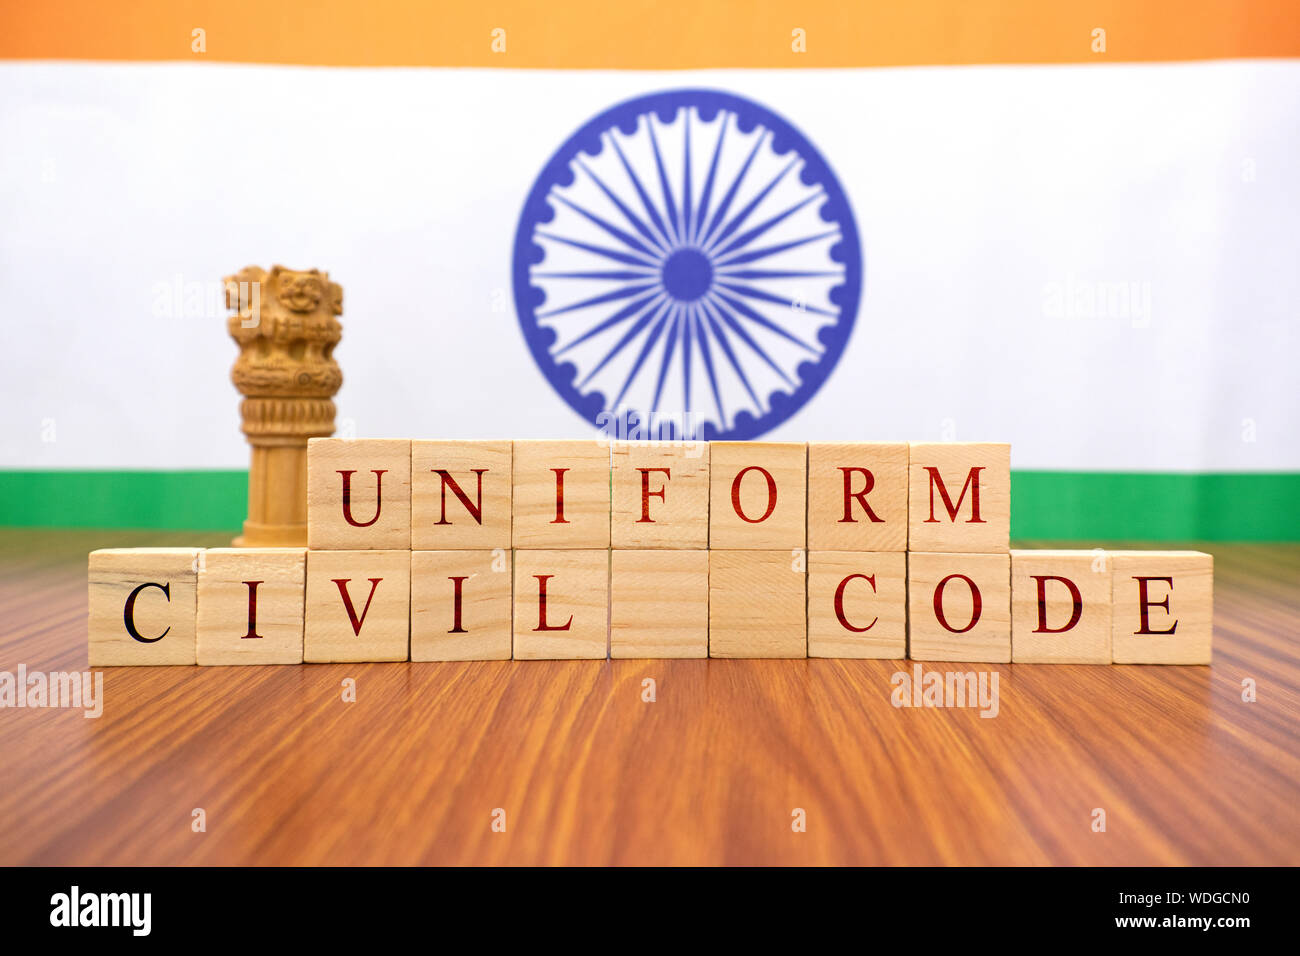 Concept of One law for all called Uniform Civil code or UCC in Indian constitution in wooden block letters and Indian flag as a background Stock Photo